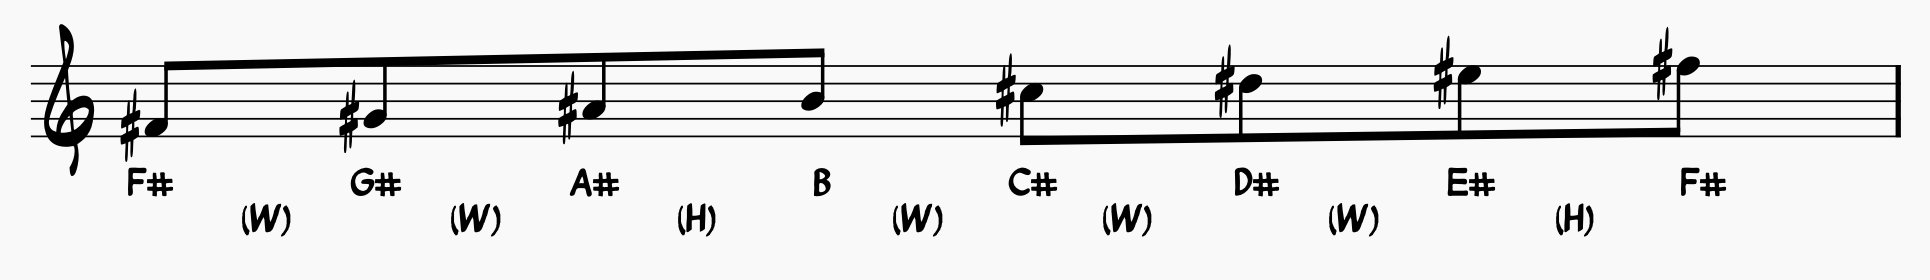 F Sharp Major Scale notated with whole steps and half steps